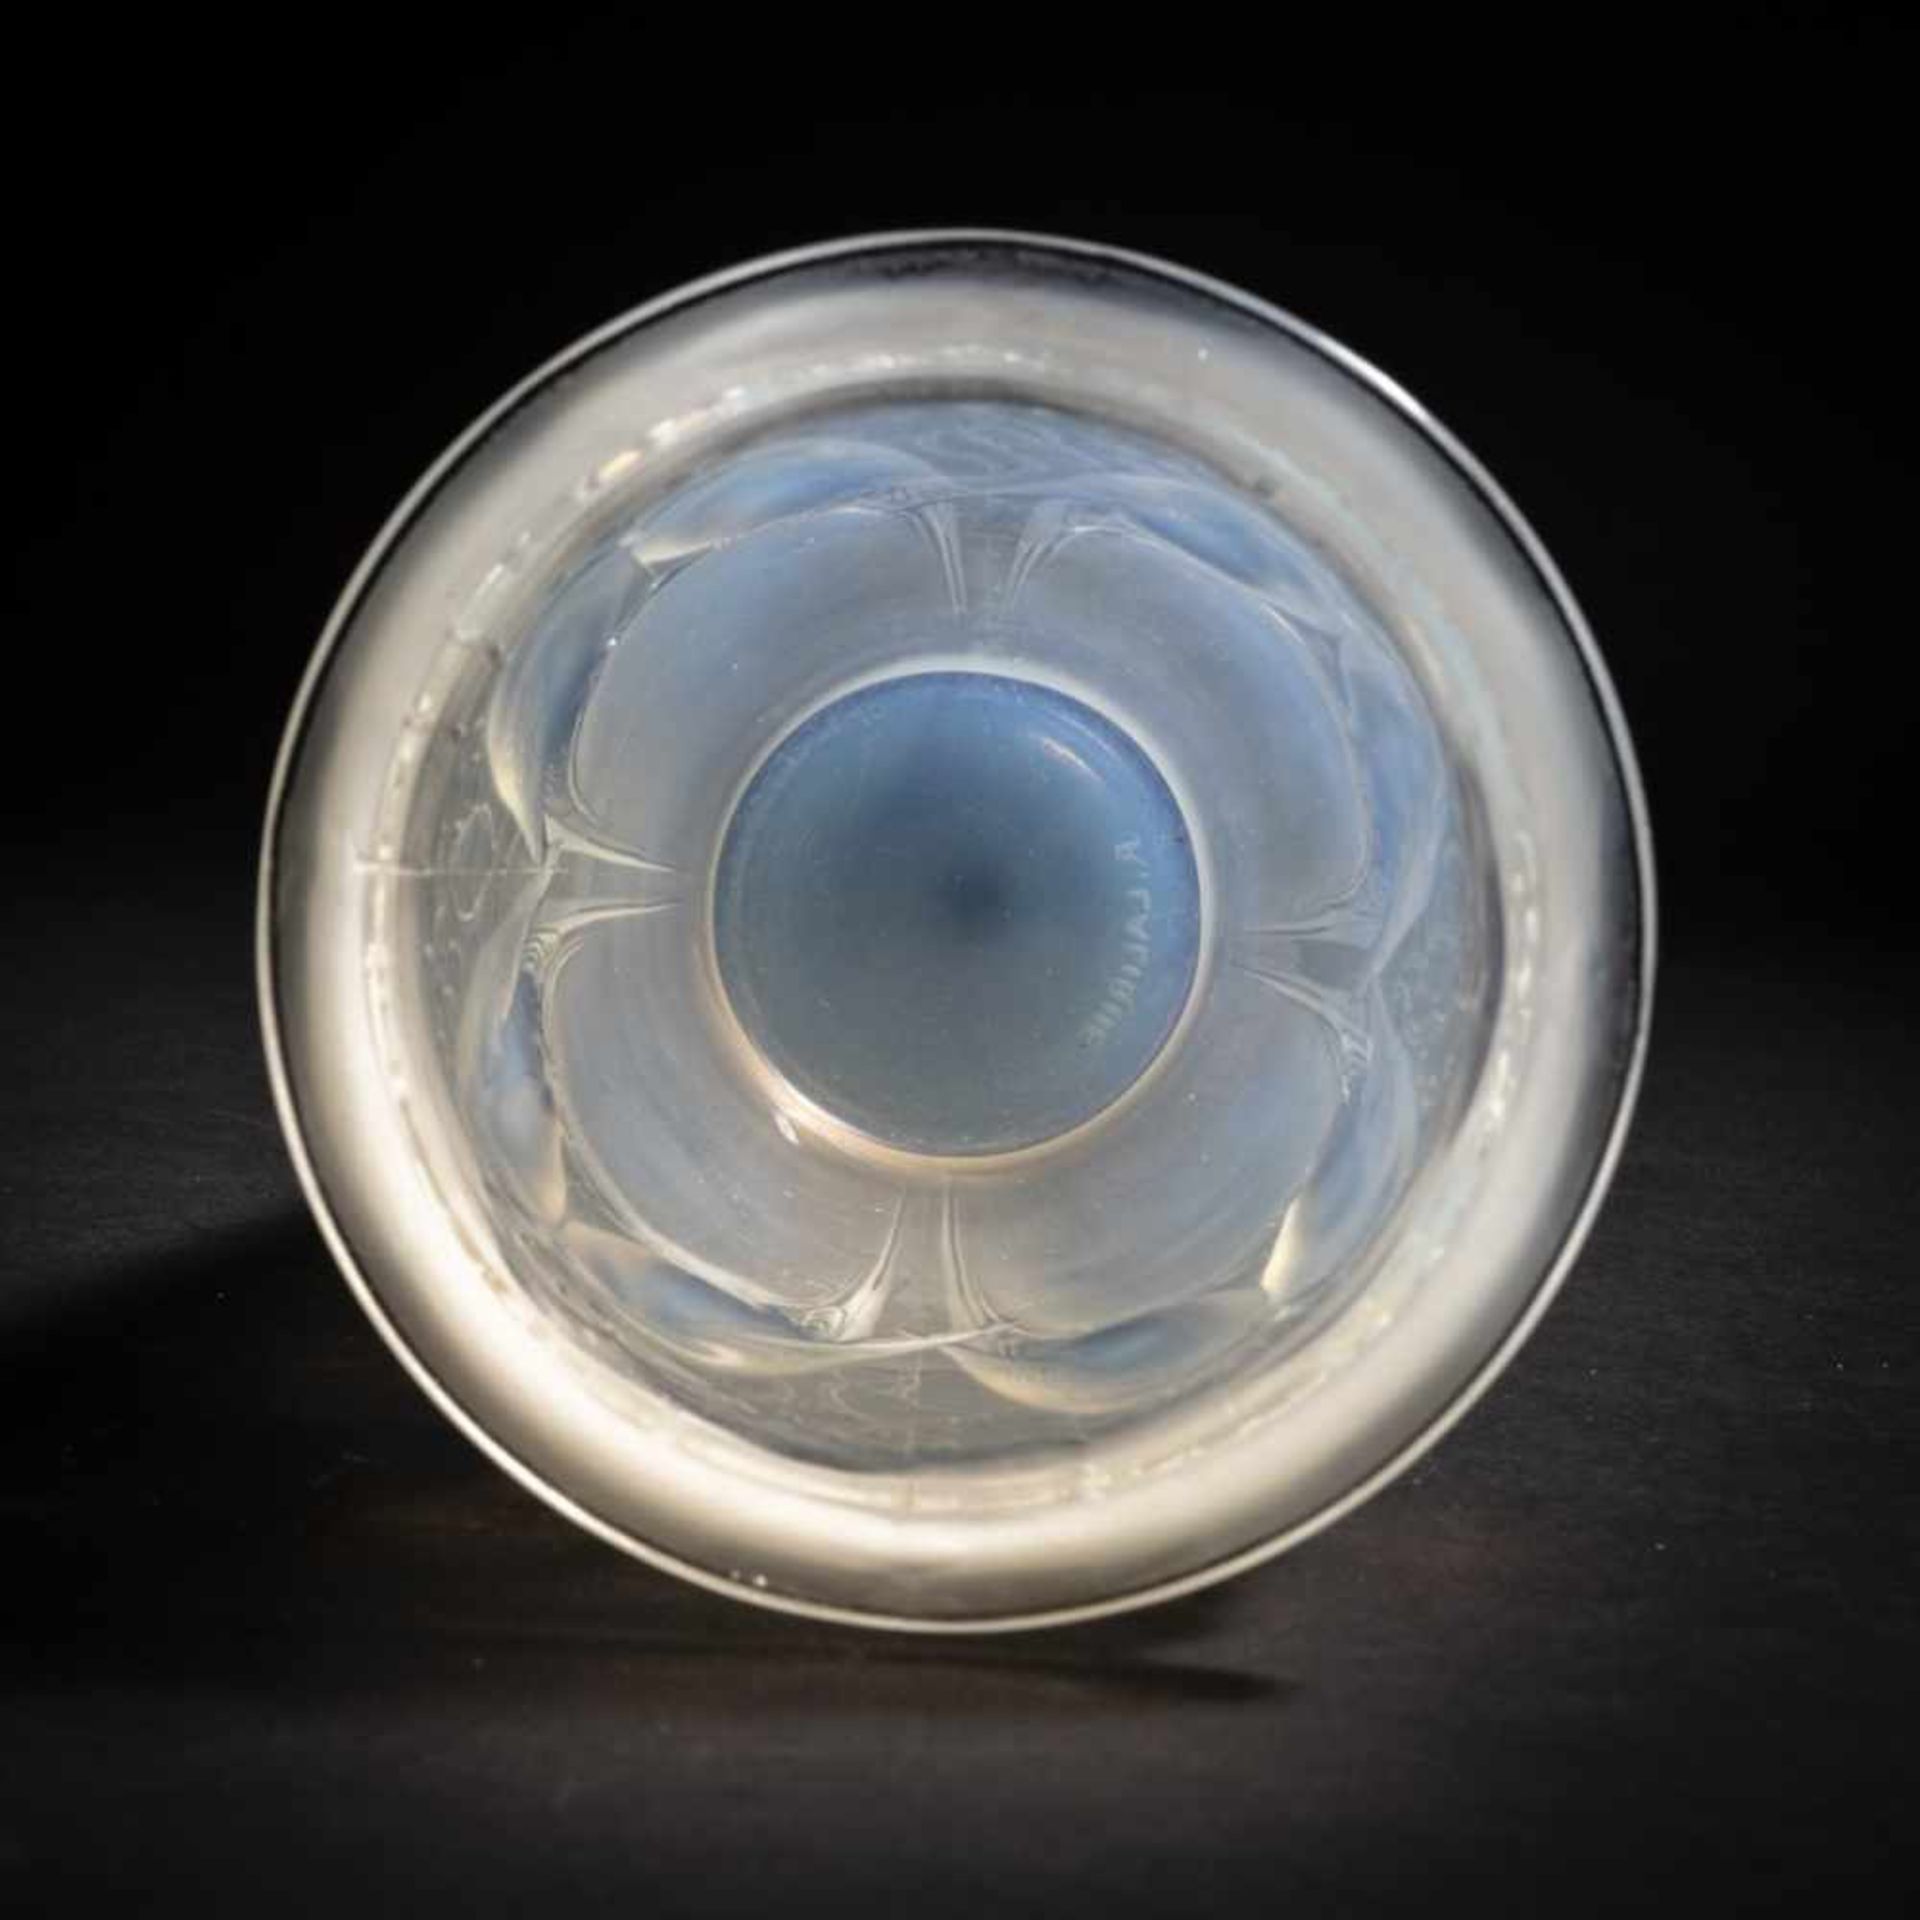 René Lalique, 'Ceylan' vase, 1924'Ceylan' vase, 1924H. 24.3 cm. Clear, moulded glass, satined and - Image 3 of 10